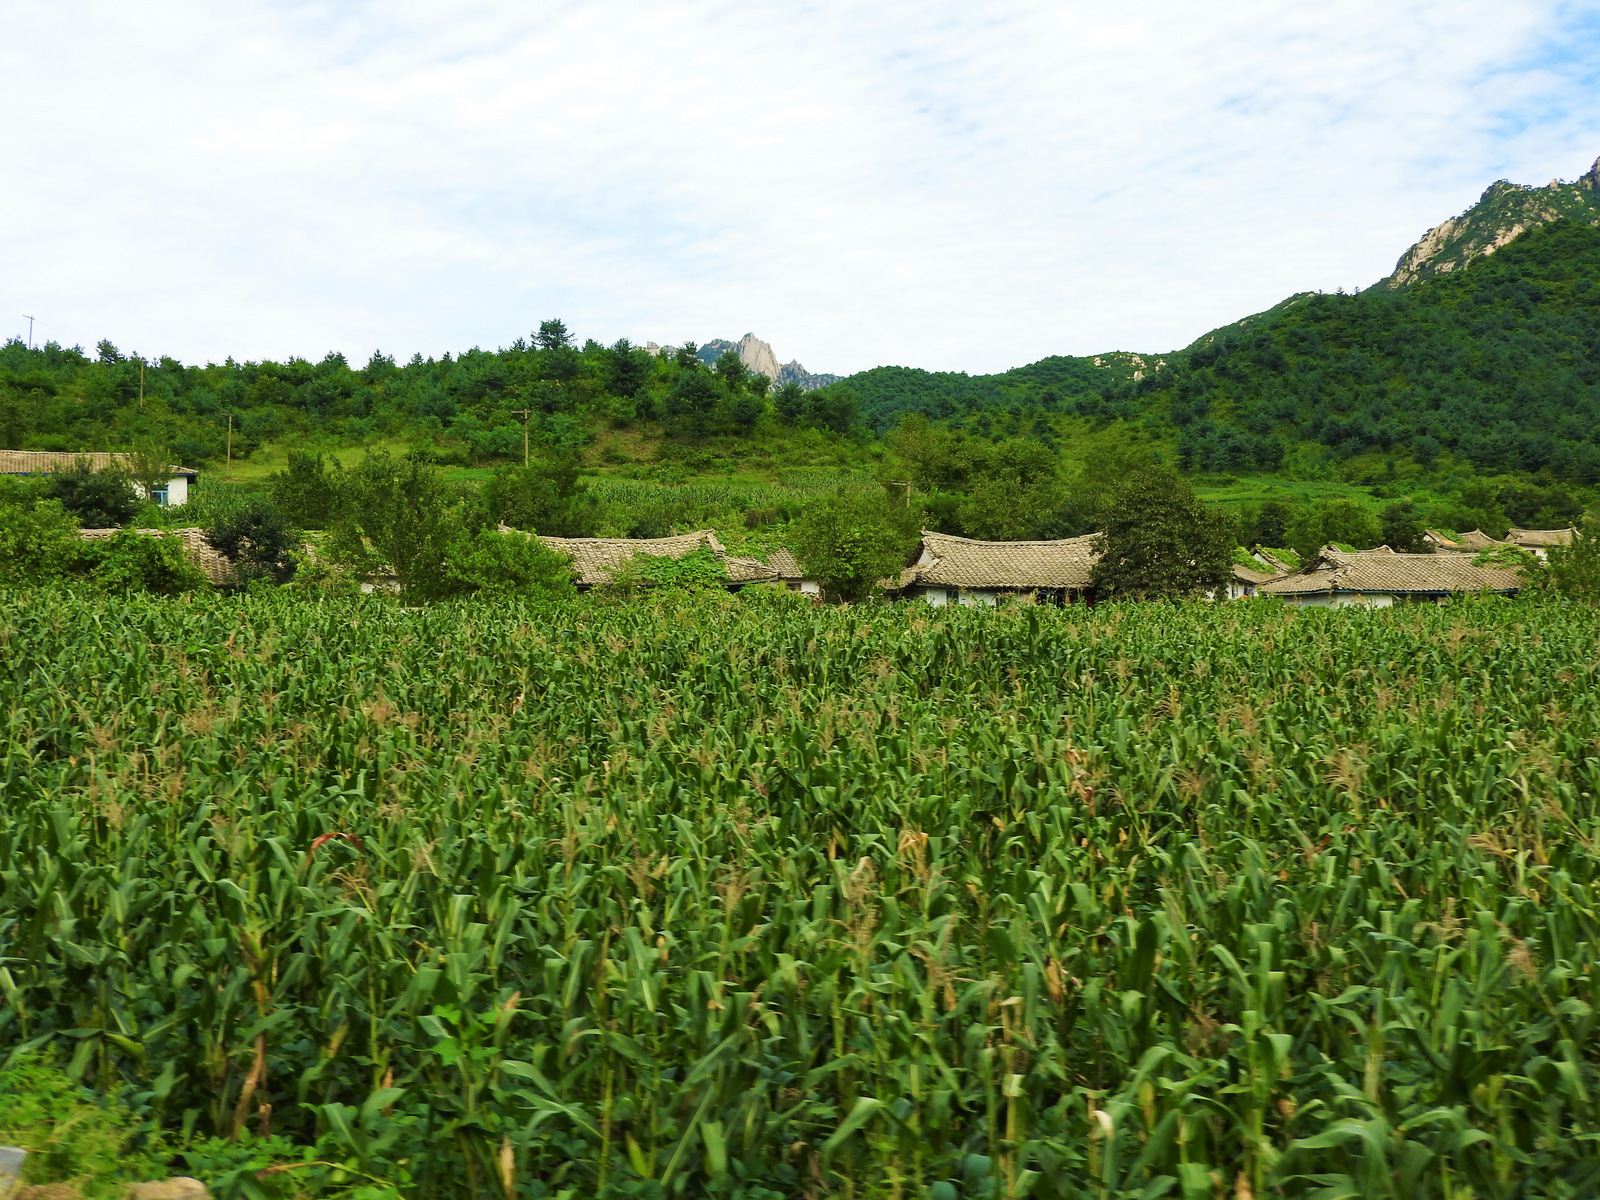 North Korea has suffered harsh periods of drought and starvation. The long-imposed brutal U.S. sanctions and destruction of the country don't help matters. Yet, traveling over a hundred kilometers south from Pyongyang, we passed endless lush fields of corn and rice.